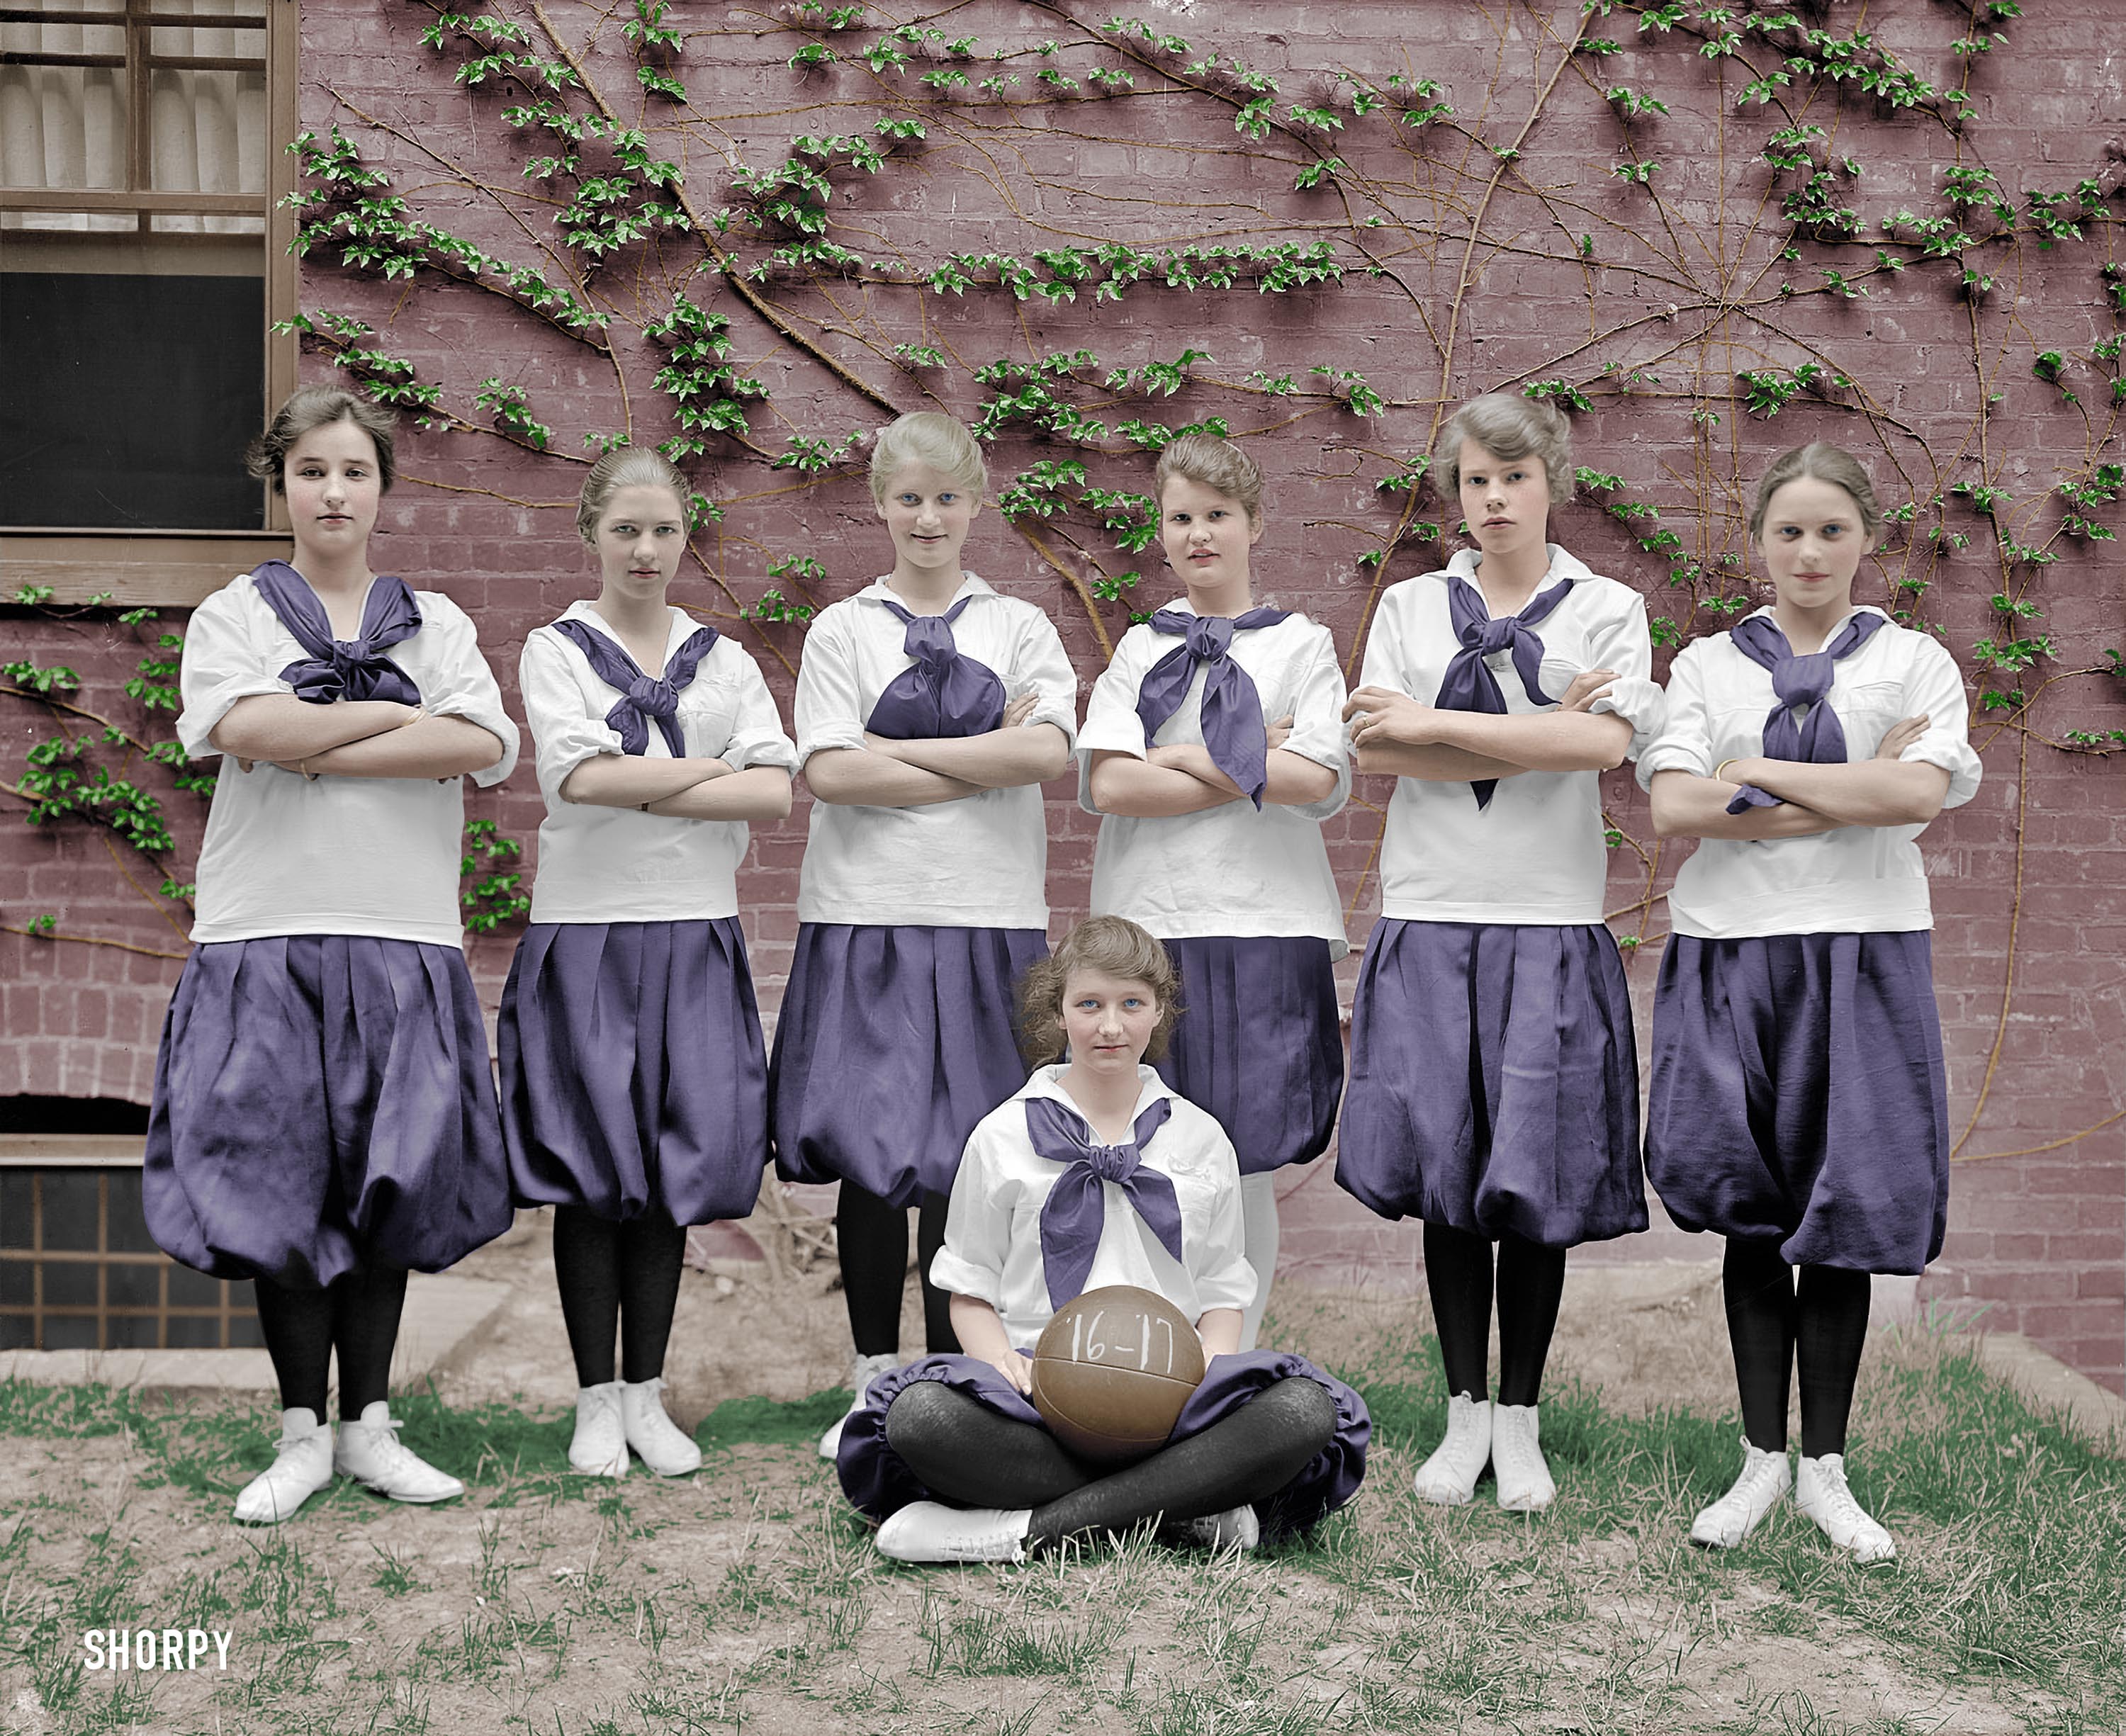 Here is my version of this Shorpy photograph. How did they ever run on a basketball court with that type of uniform on?